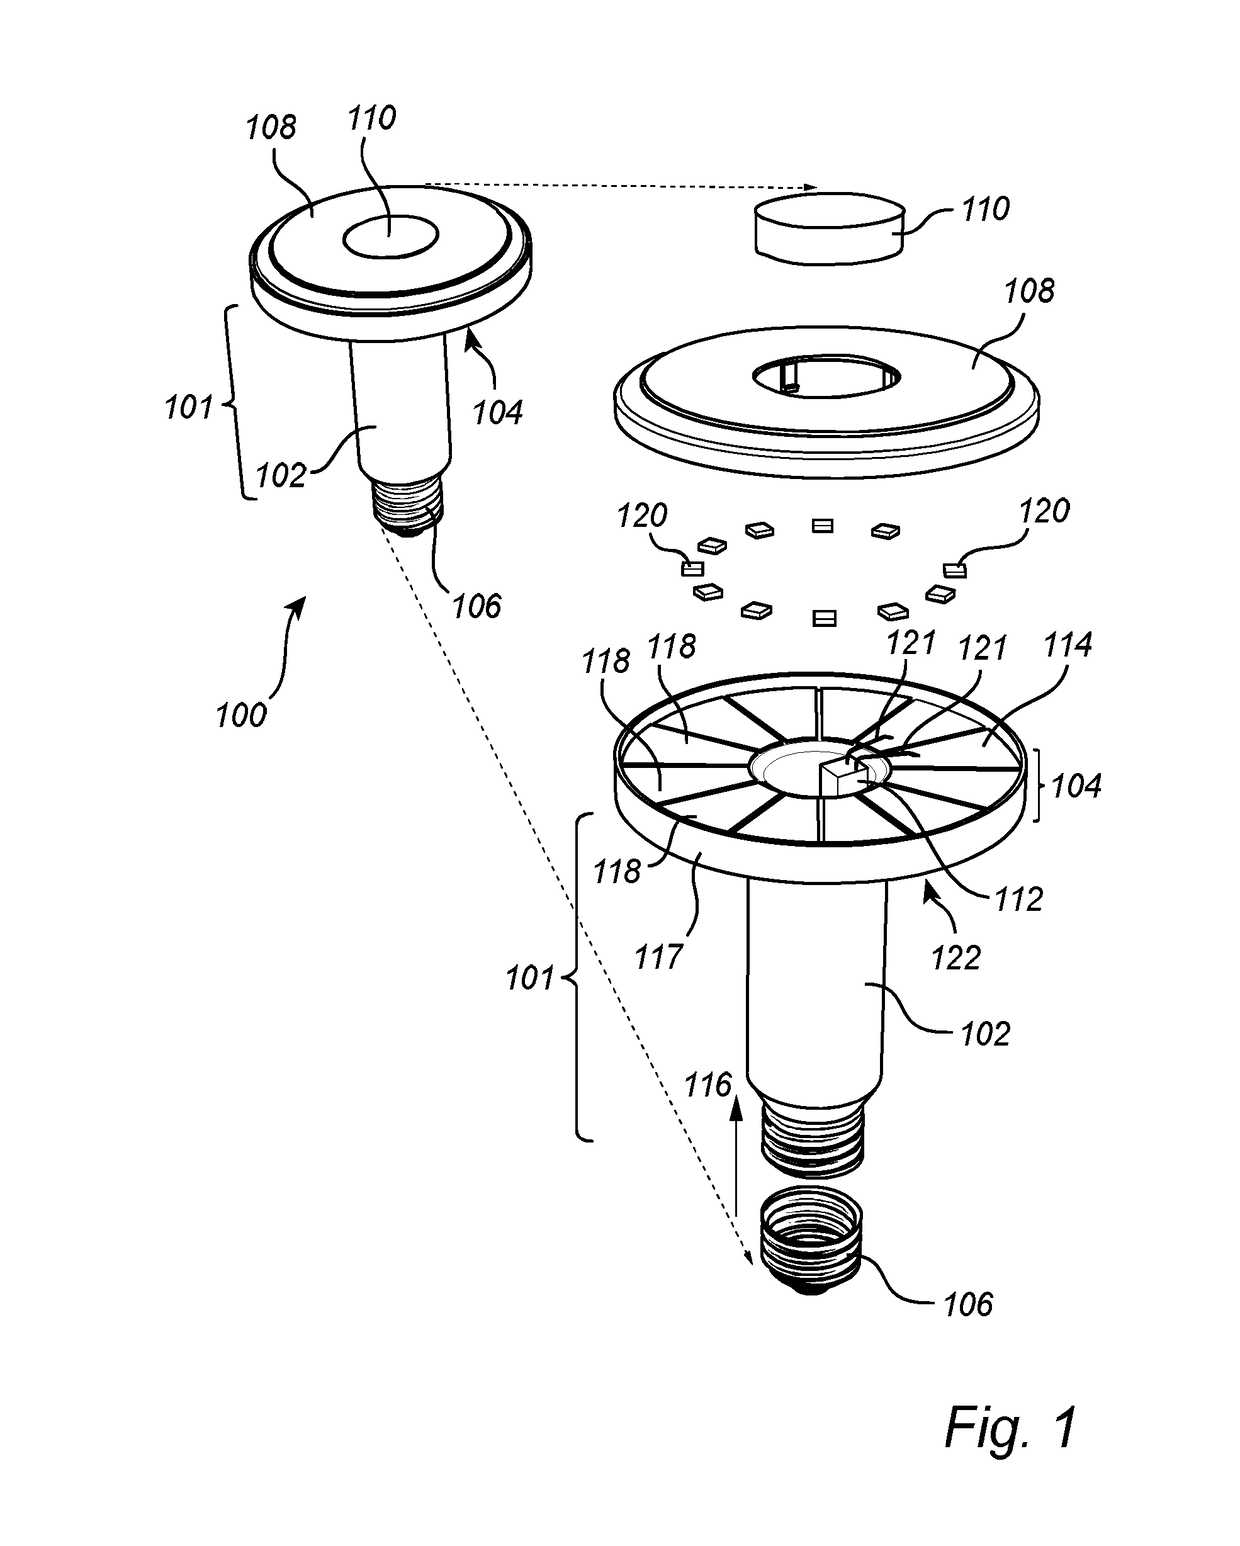 Lighting device with an improved housing